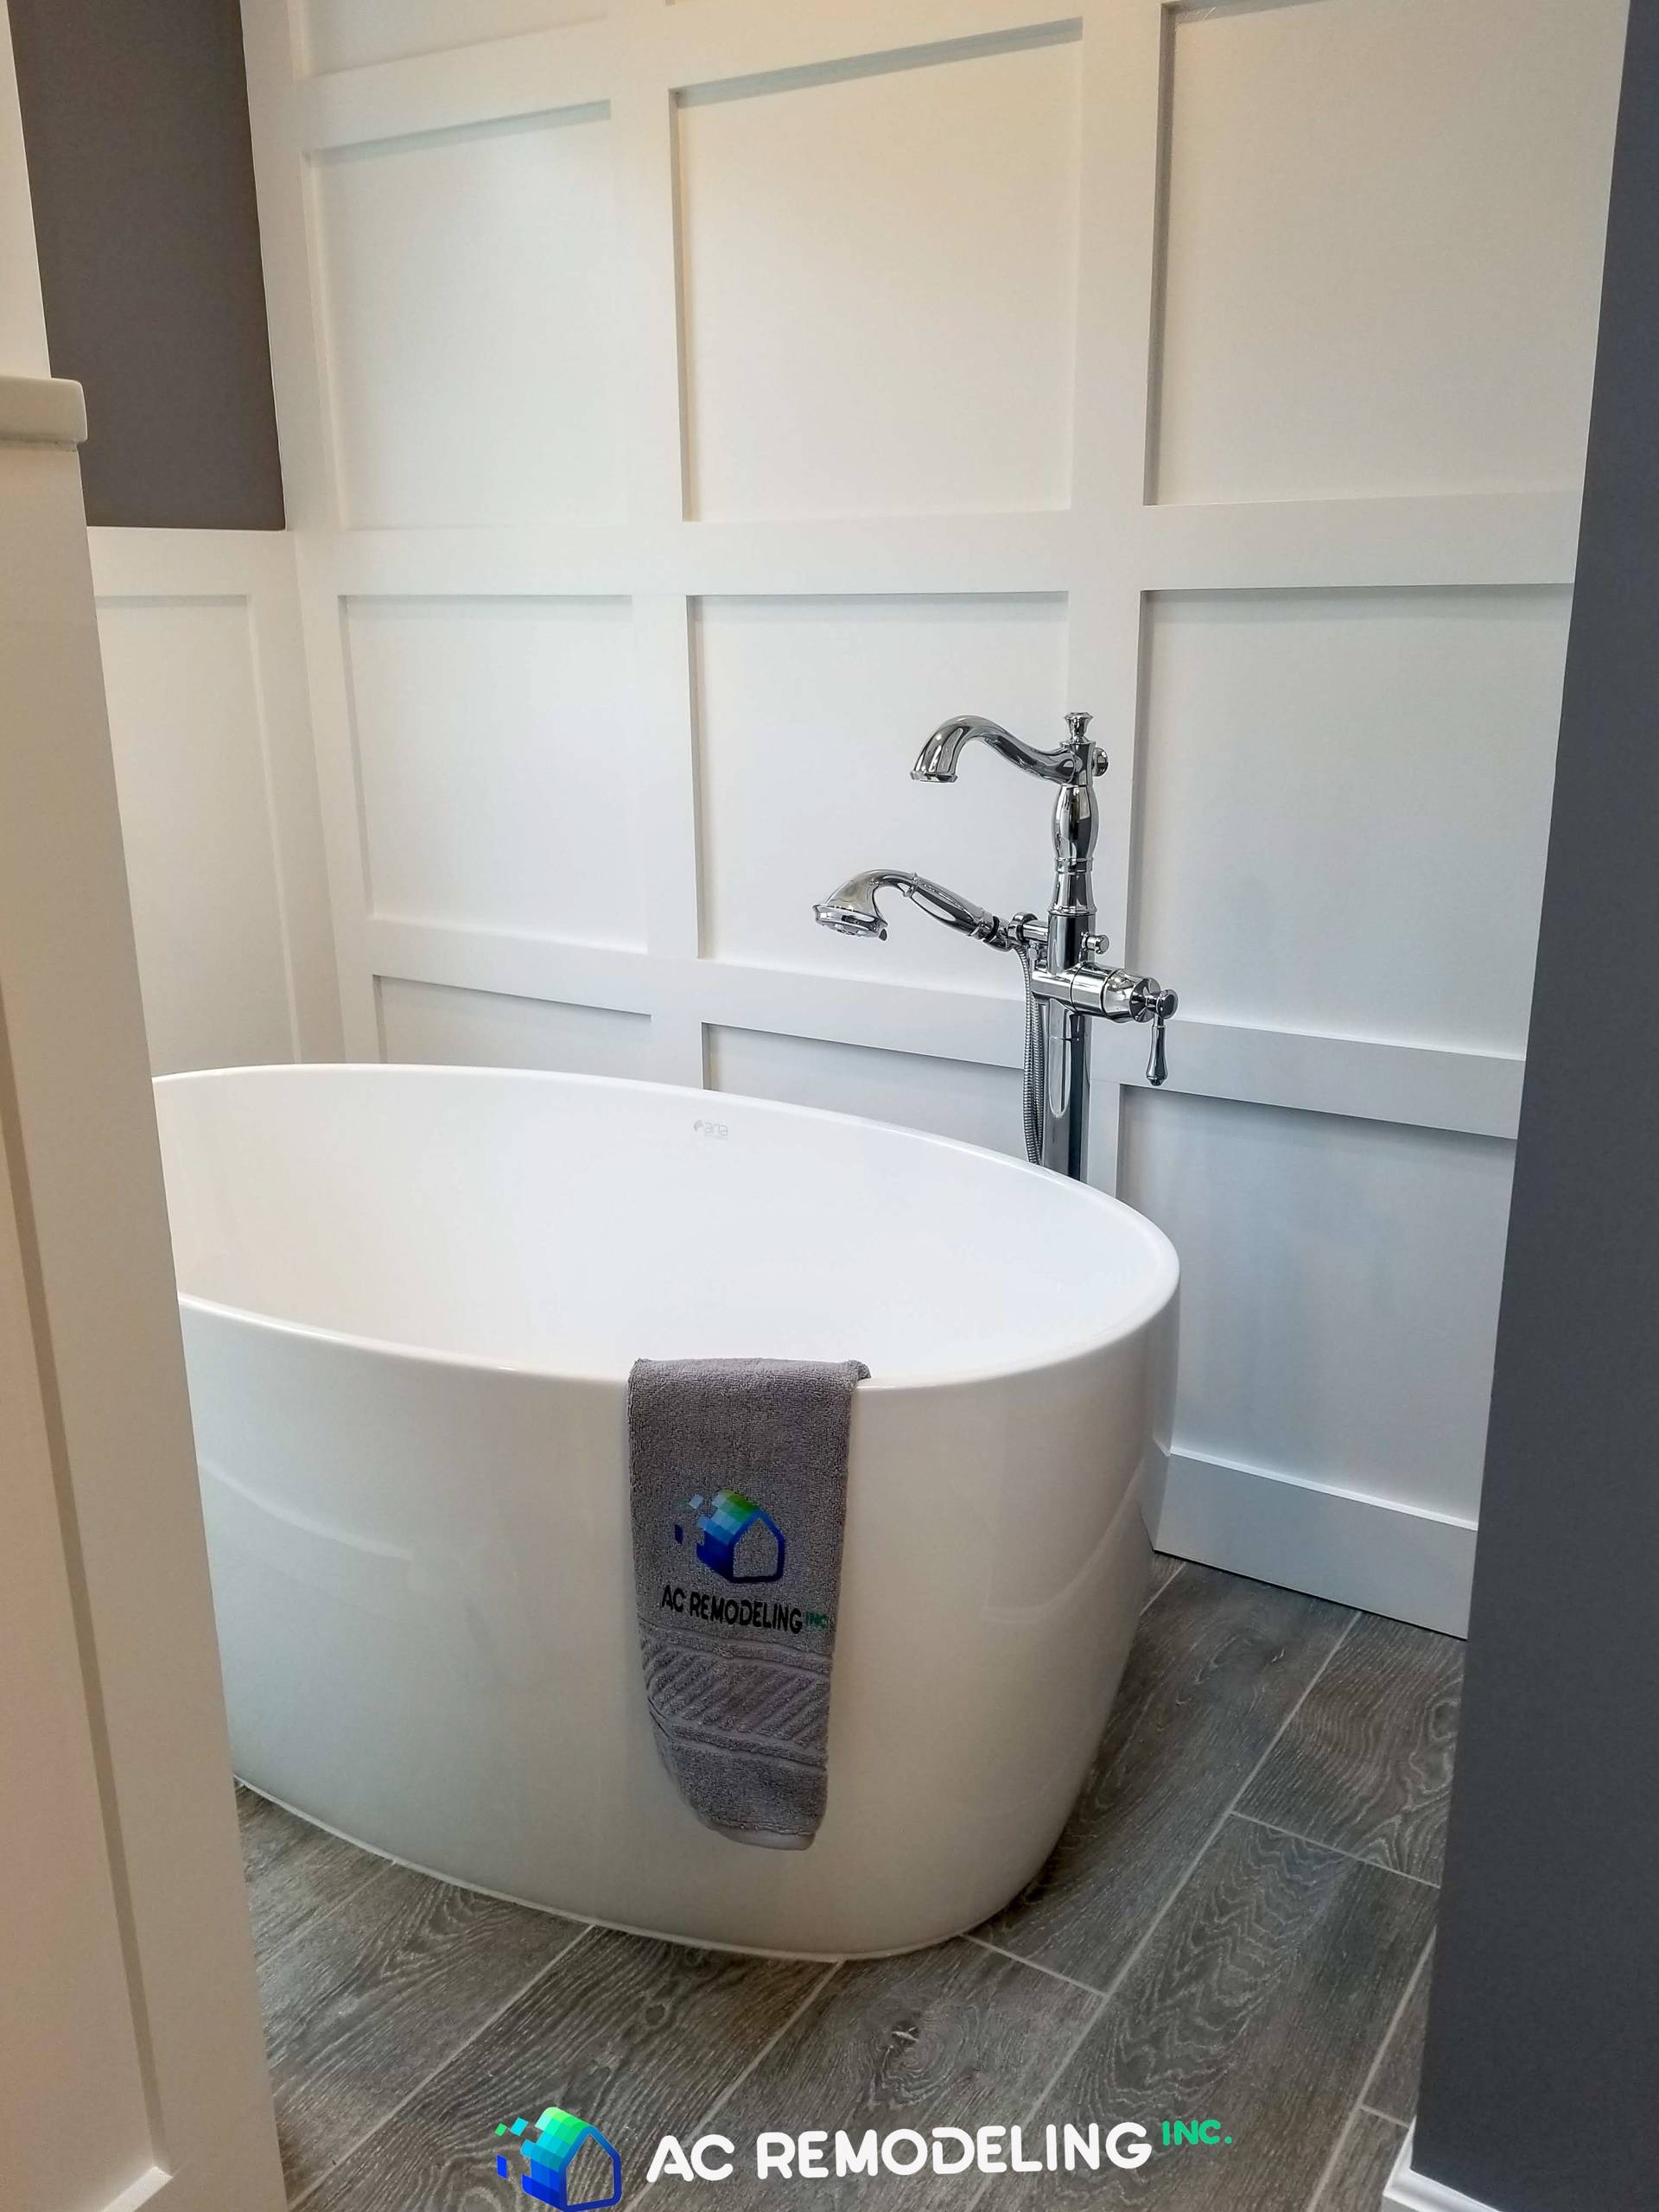 Freestanding tub and white paneling wall